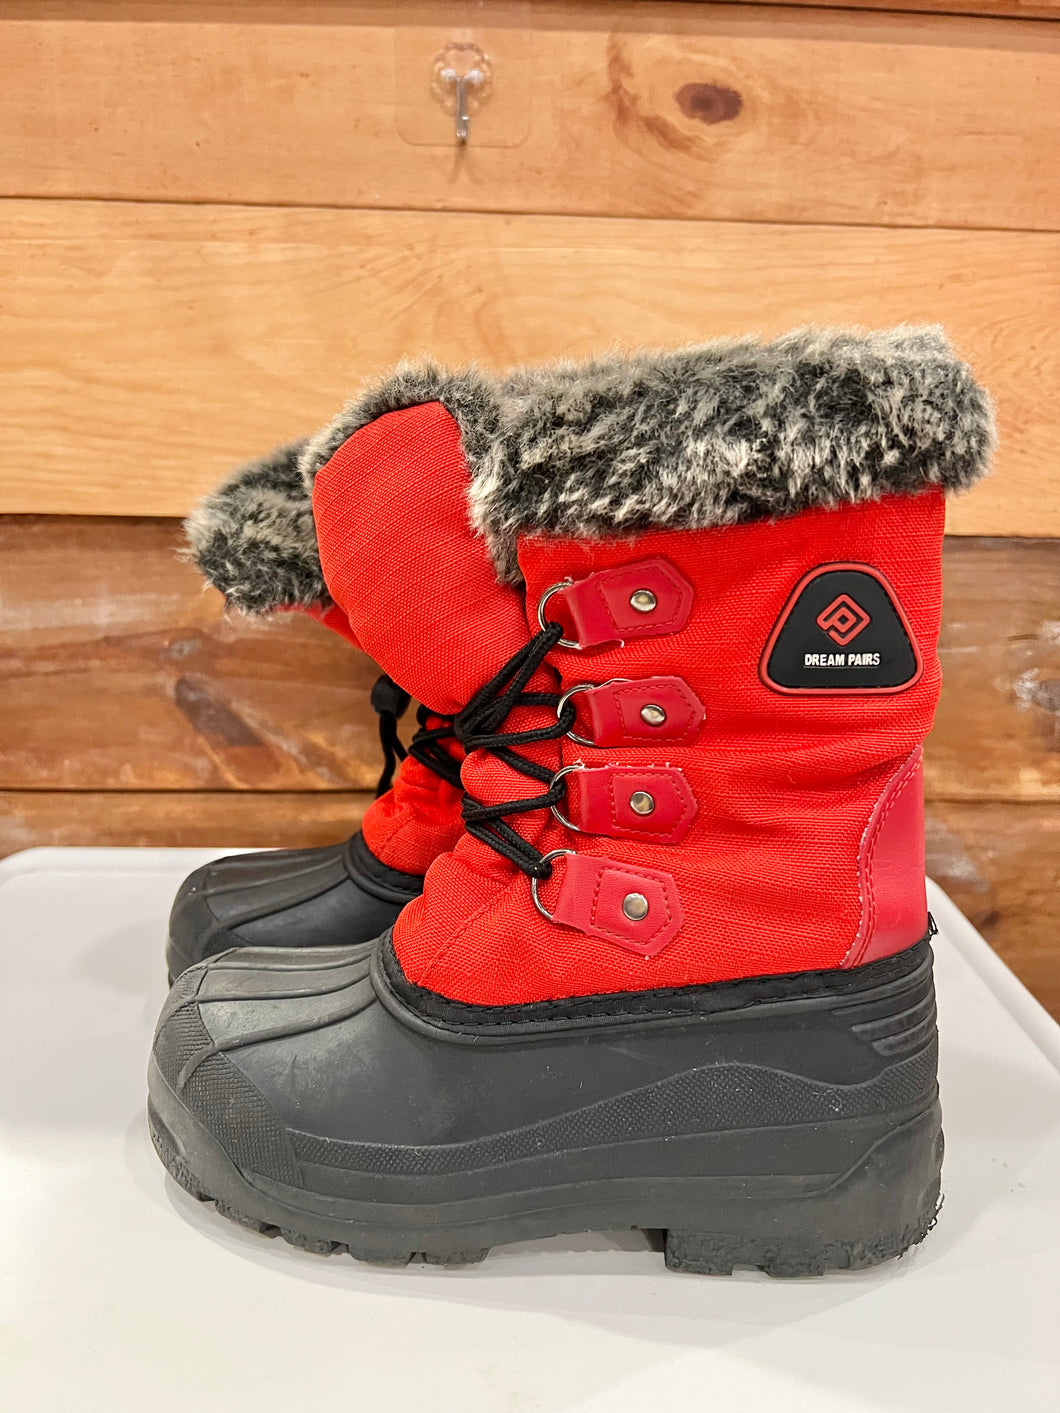 Dream Pairs Red Snow Boots Size 1 Youth